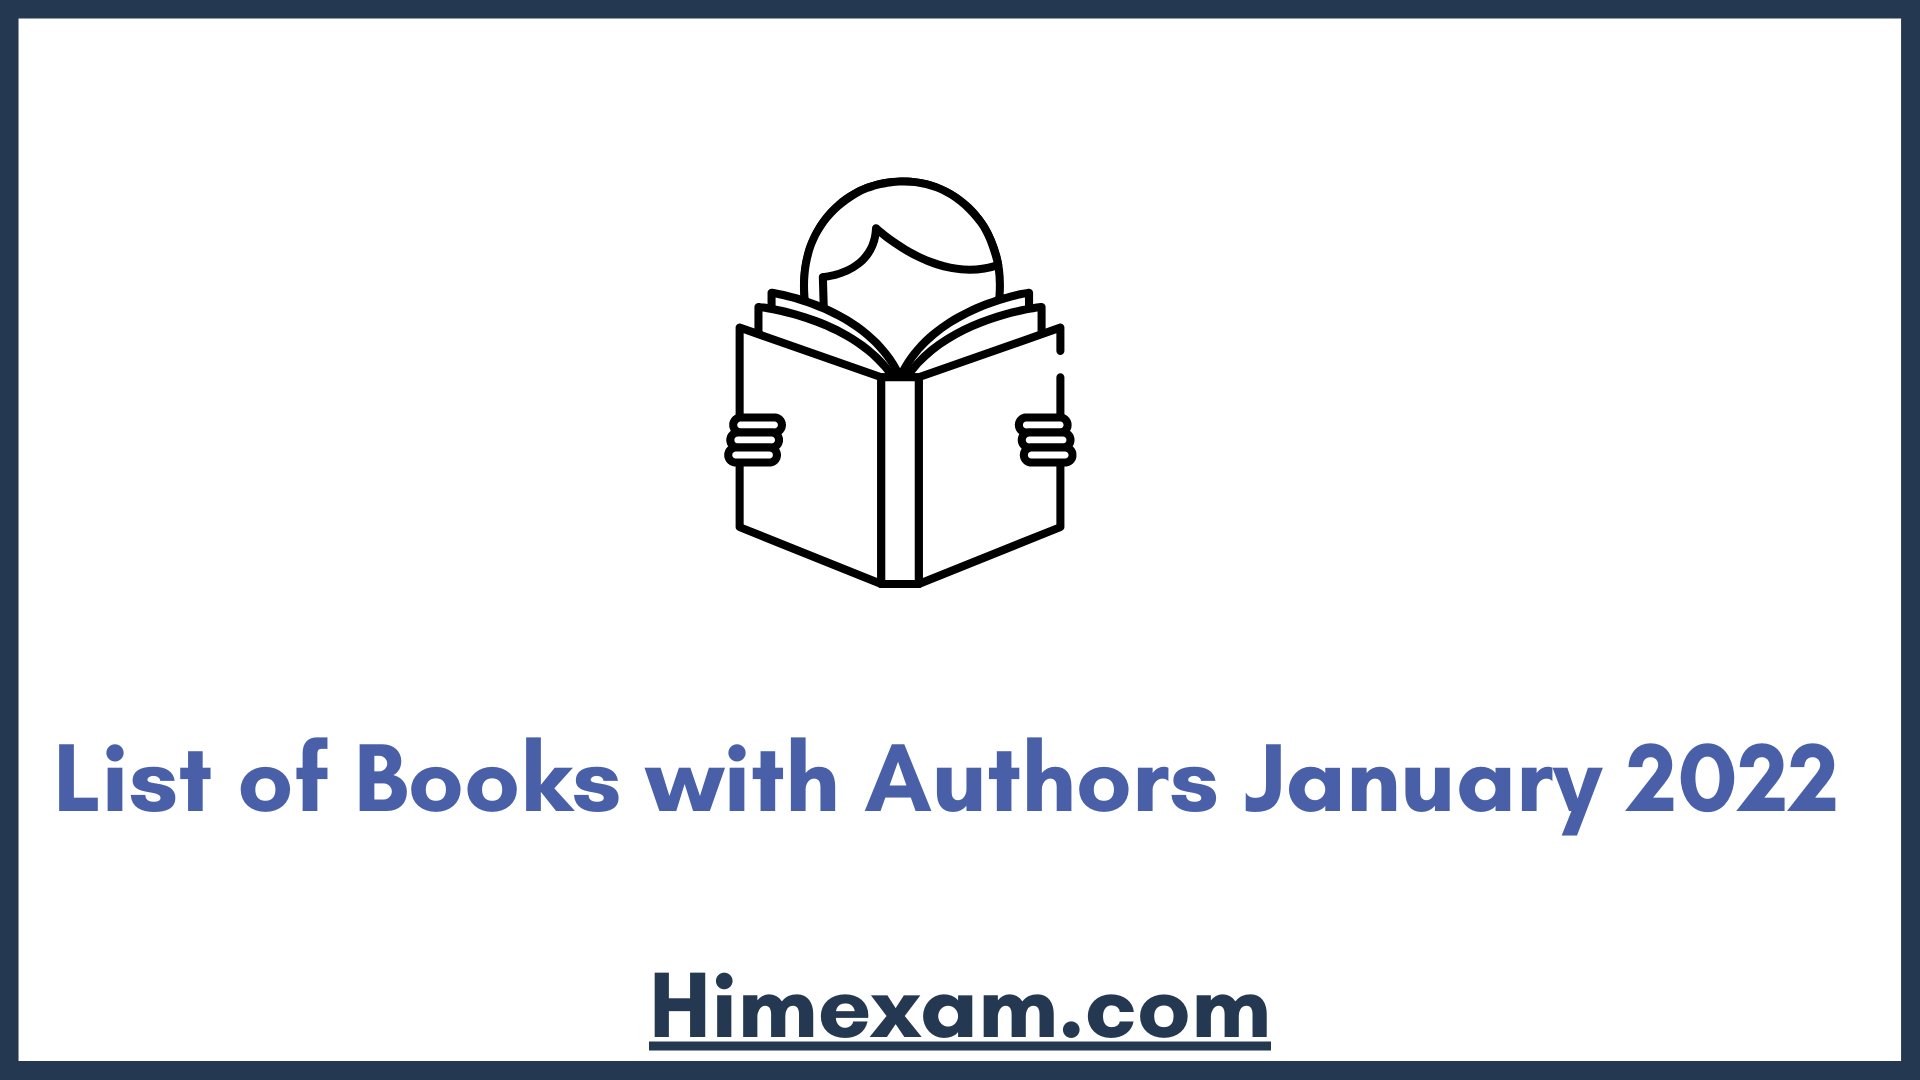 List of Books with Authors January 2022